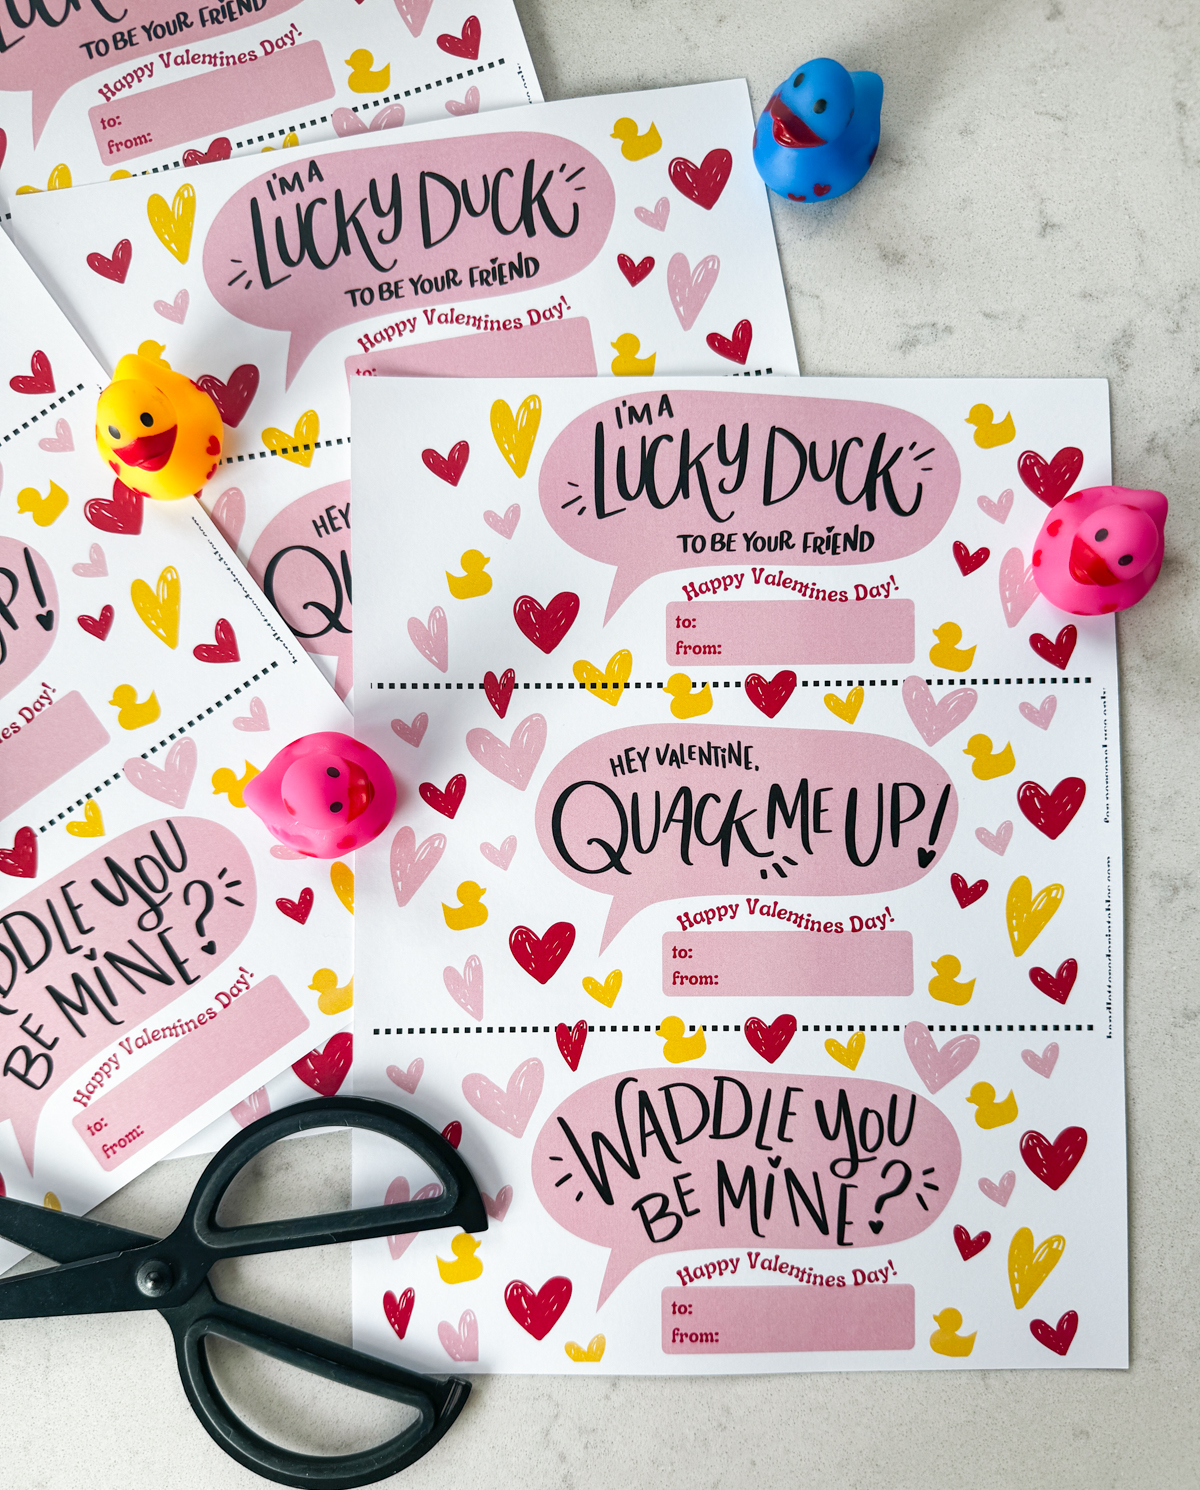 duck themed printable valentines day cards. card shown reads: waddle you be mine, hey valentine you quack me up and lucky to be your friend- all with a small happy valentines day. shown with rubber duckies, shown ready to be cut to size